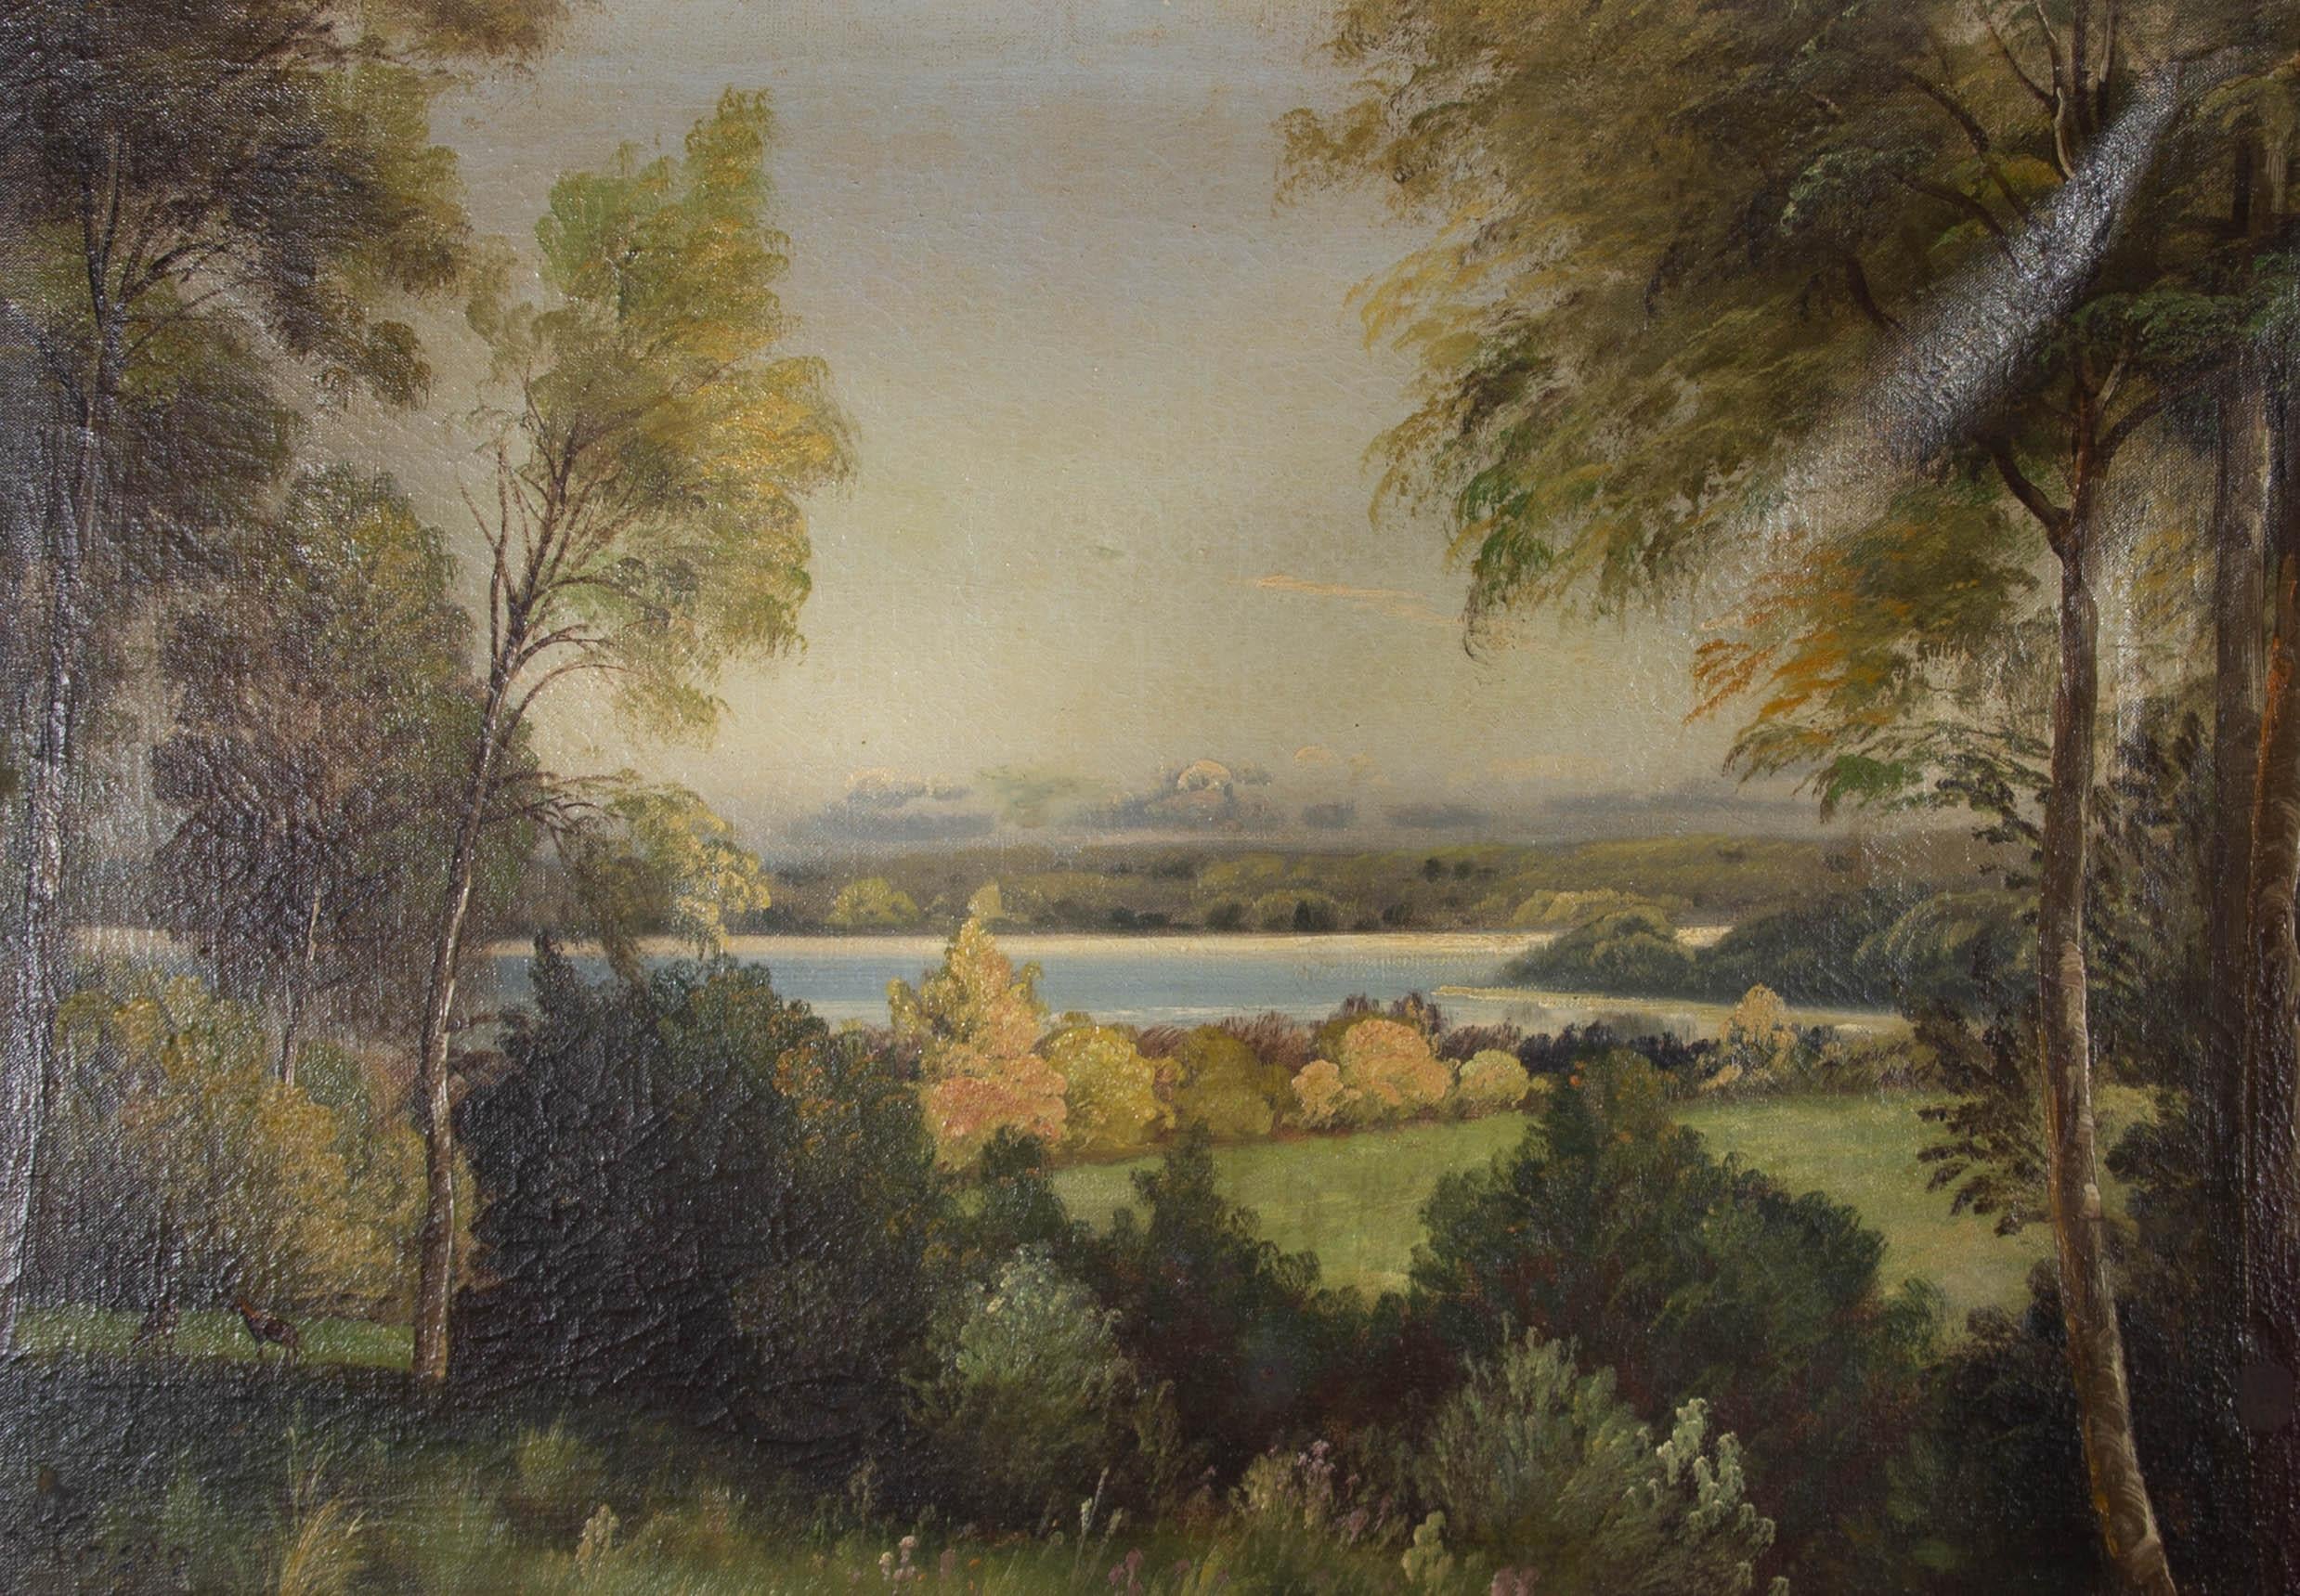 A charming landscape scene by Danish artist Axel Johansen. Depicting a calm lake in a forest setting with two deer grazing to the left hand side of the composition. Signed to the lower left. Presented in a substantial gilt frame with a decorative